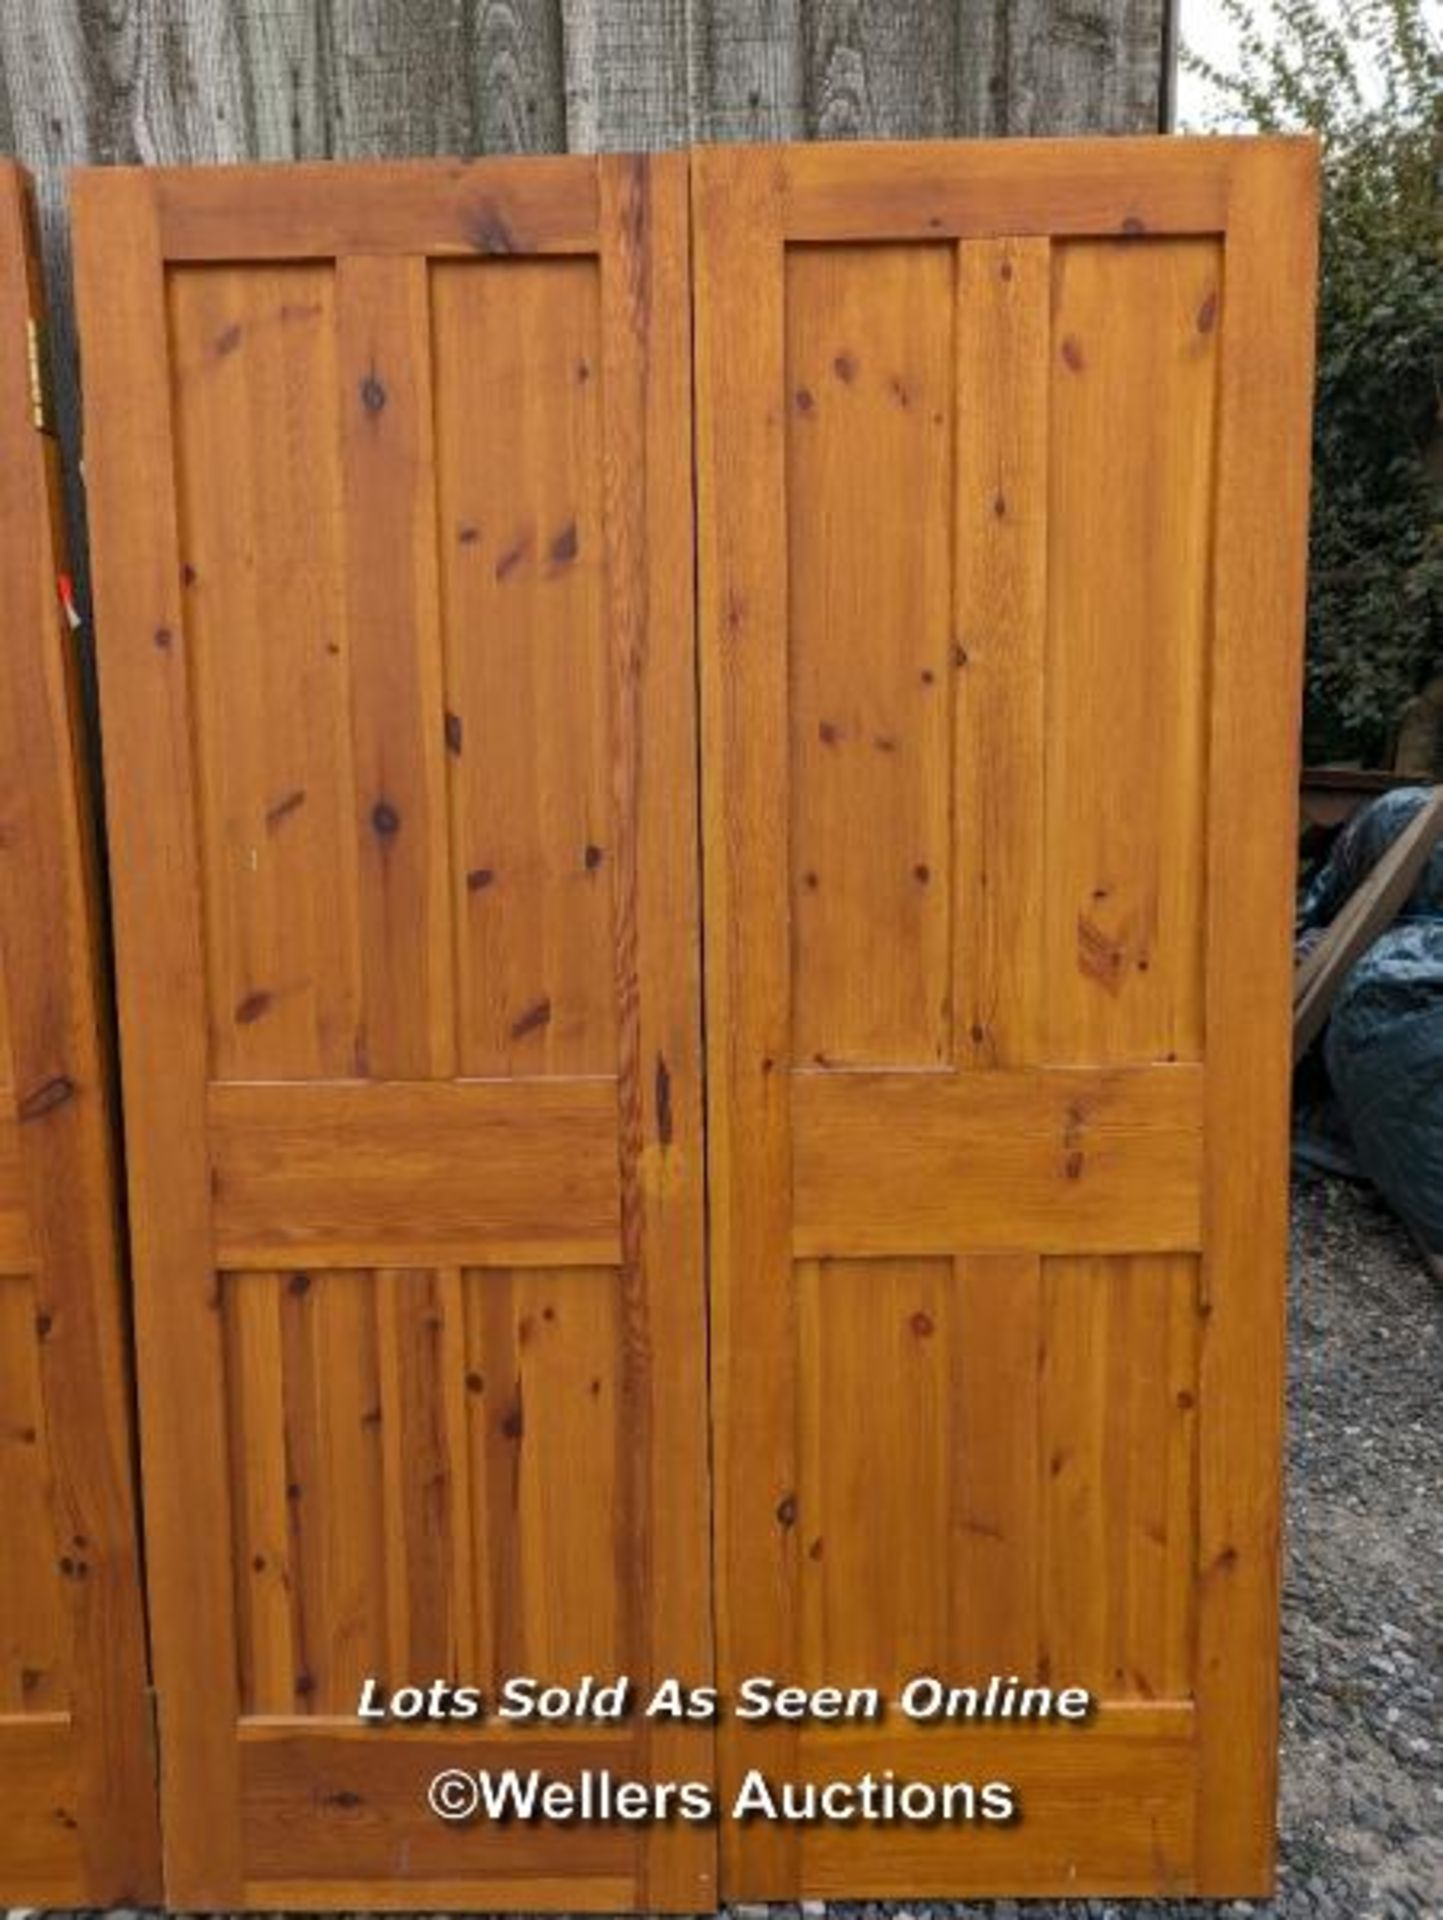 4 matching pine four panel doors, morticed and tenoned construction. Each door 61cm x 183cm x 4cm. - Image 3 of 5